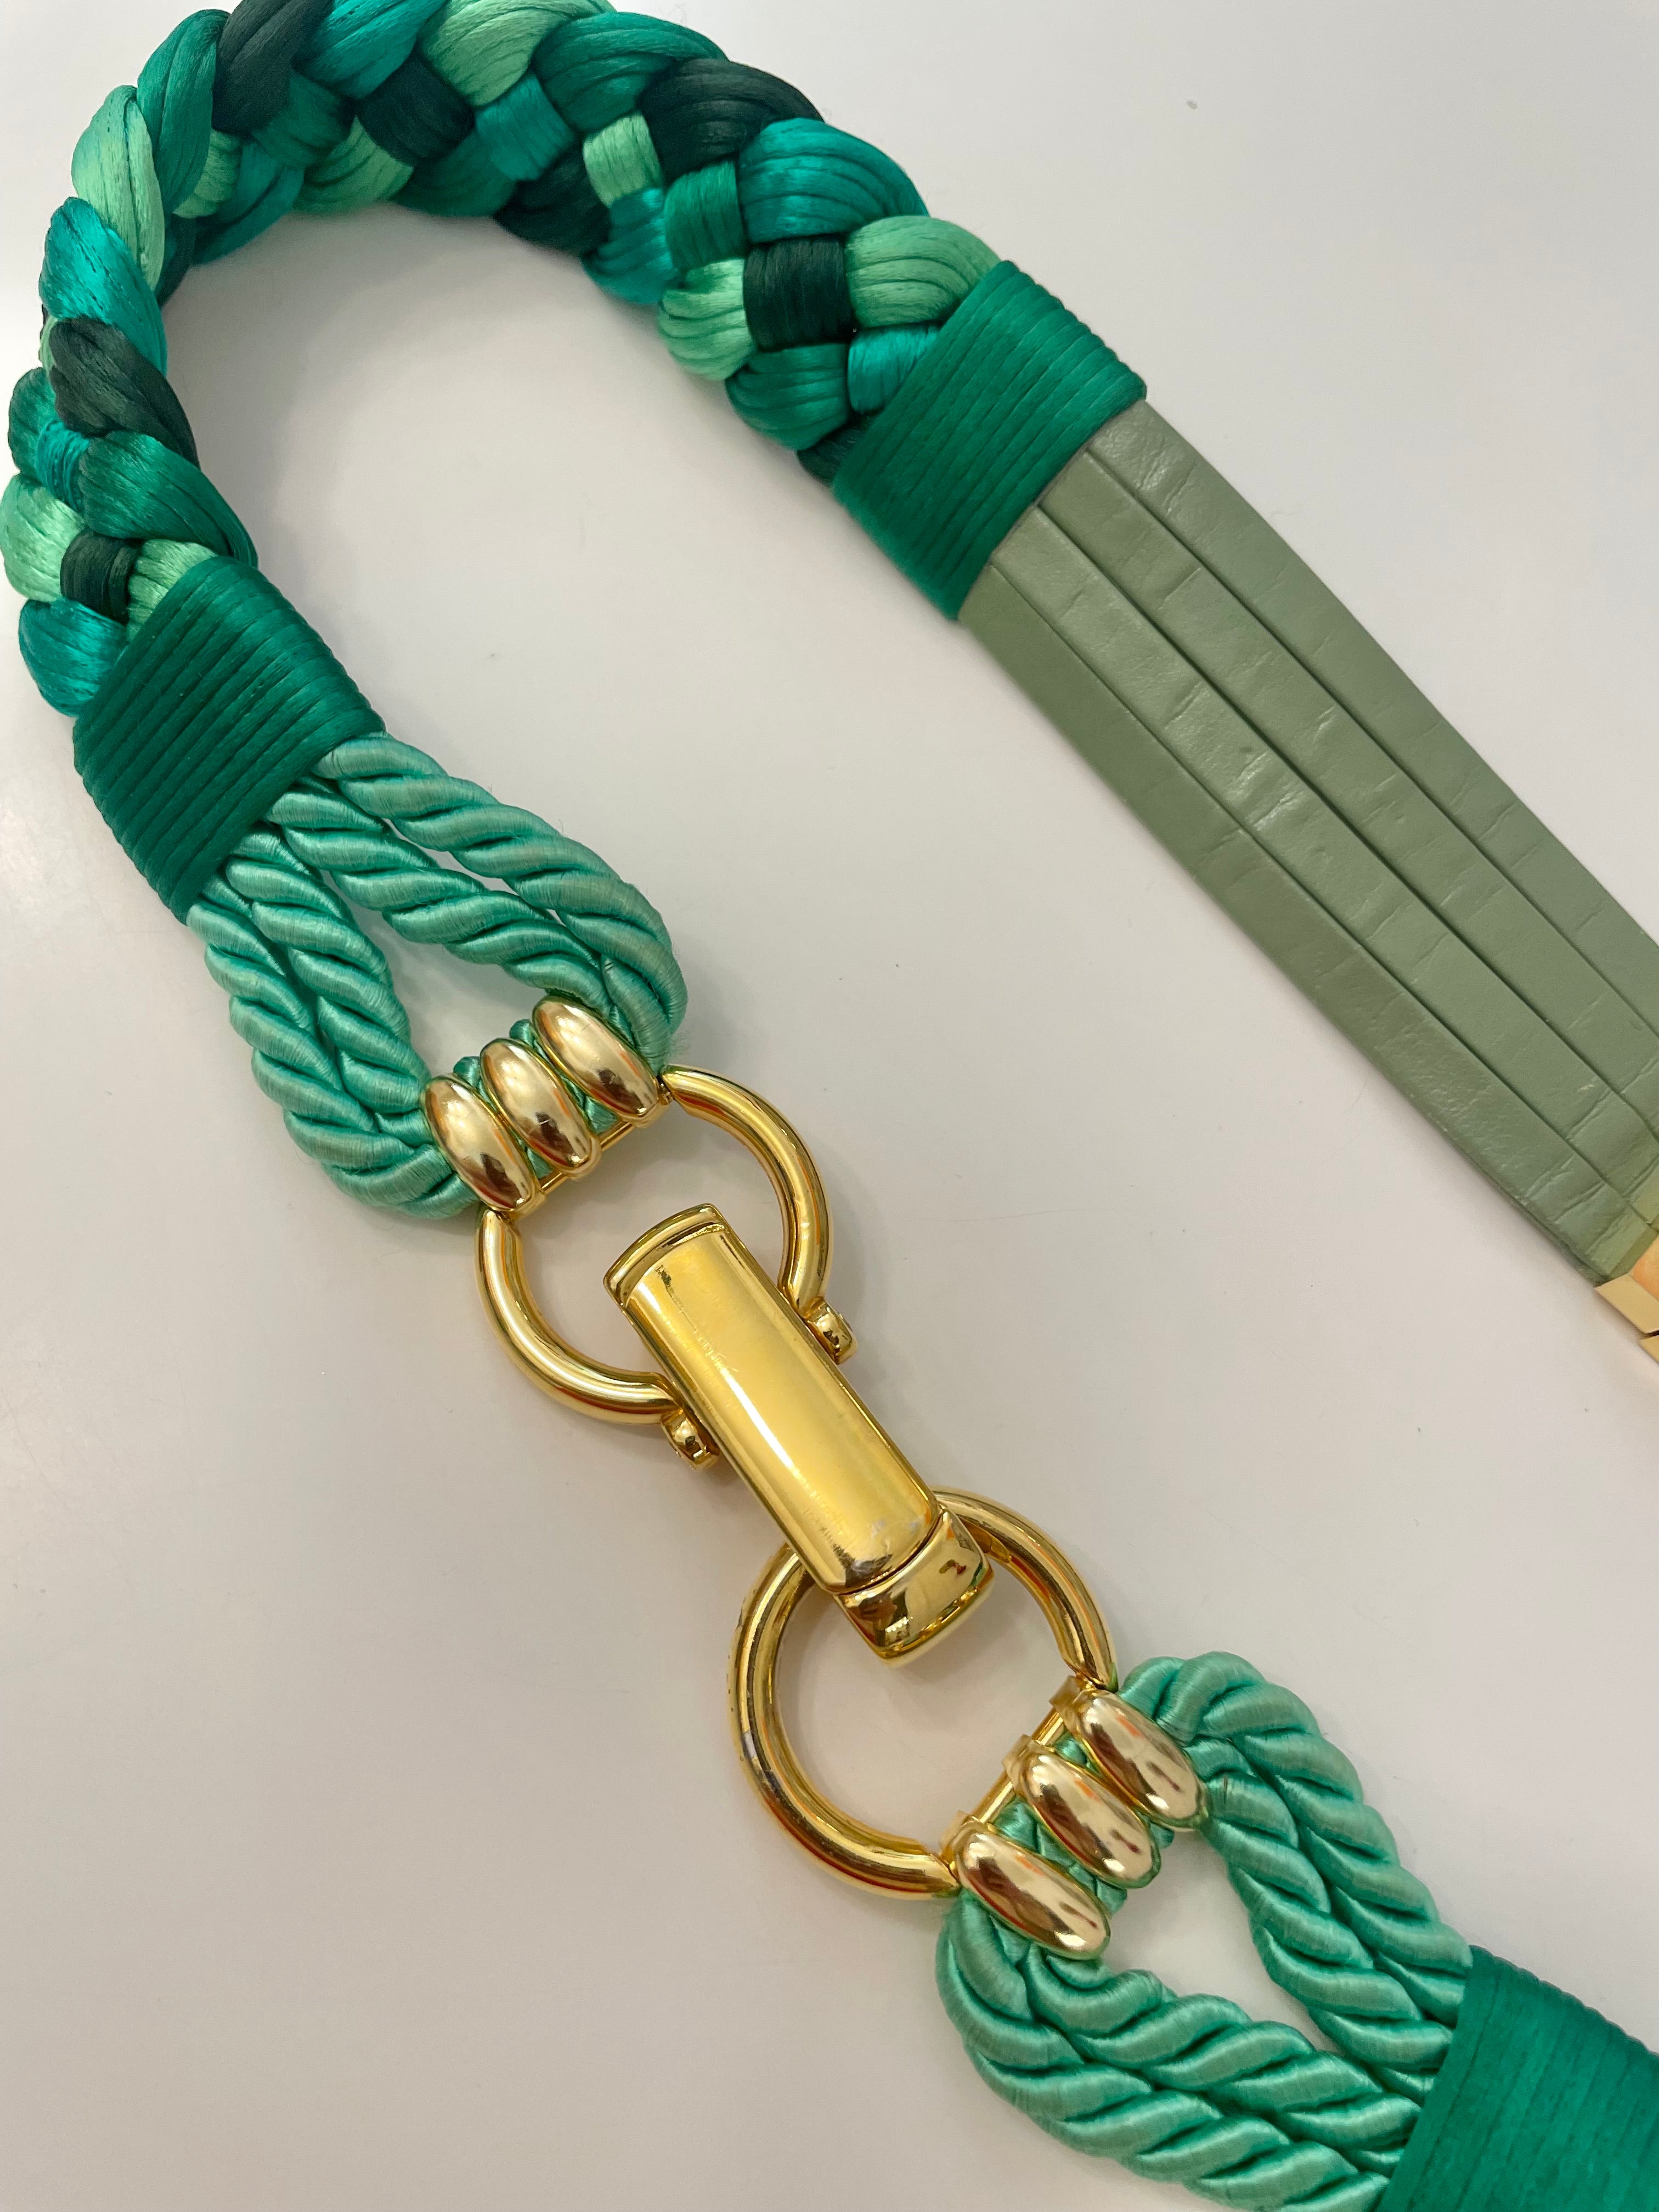 A truly special 1970's belt. I adore this green braided design... oh so chic.